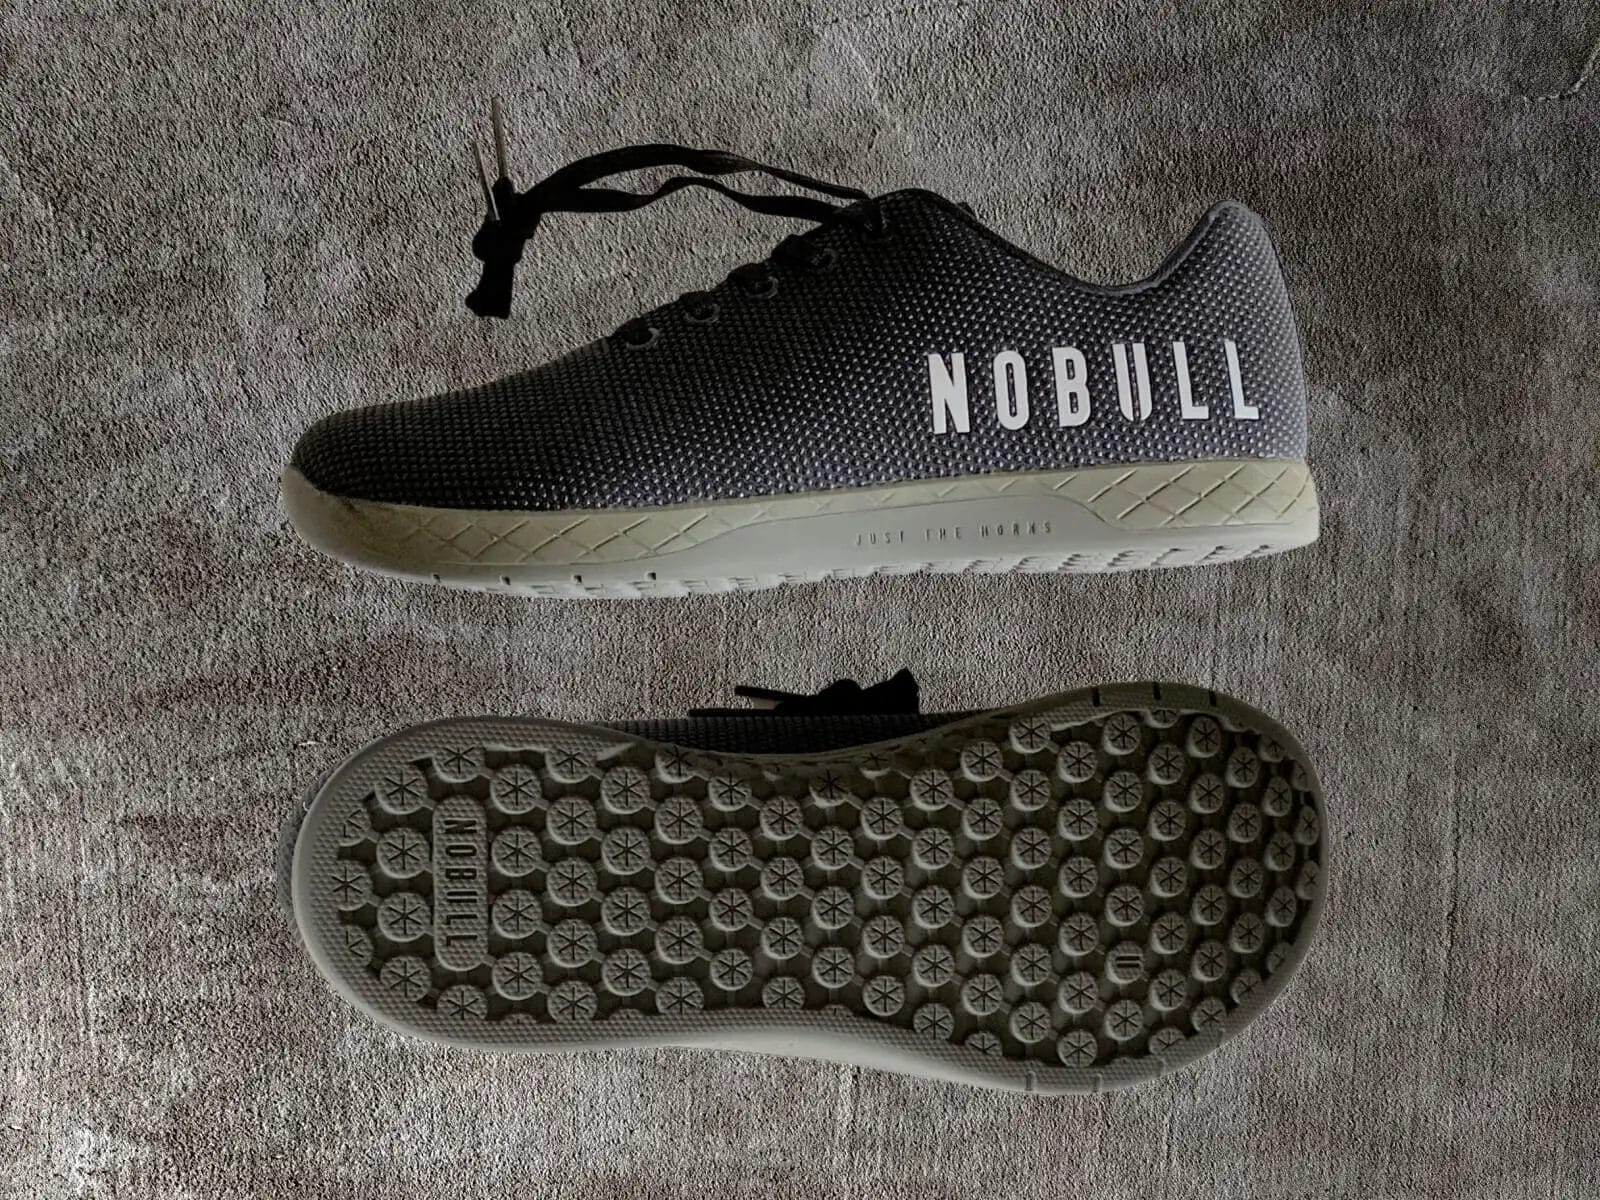 NoBull black trainers with details of profile and outsole.